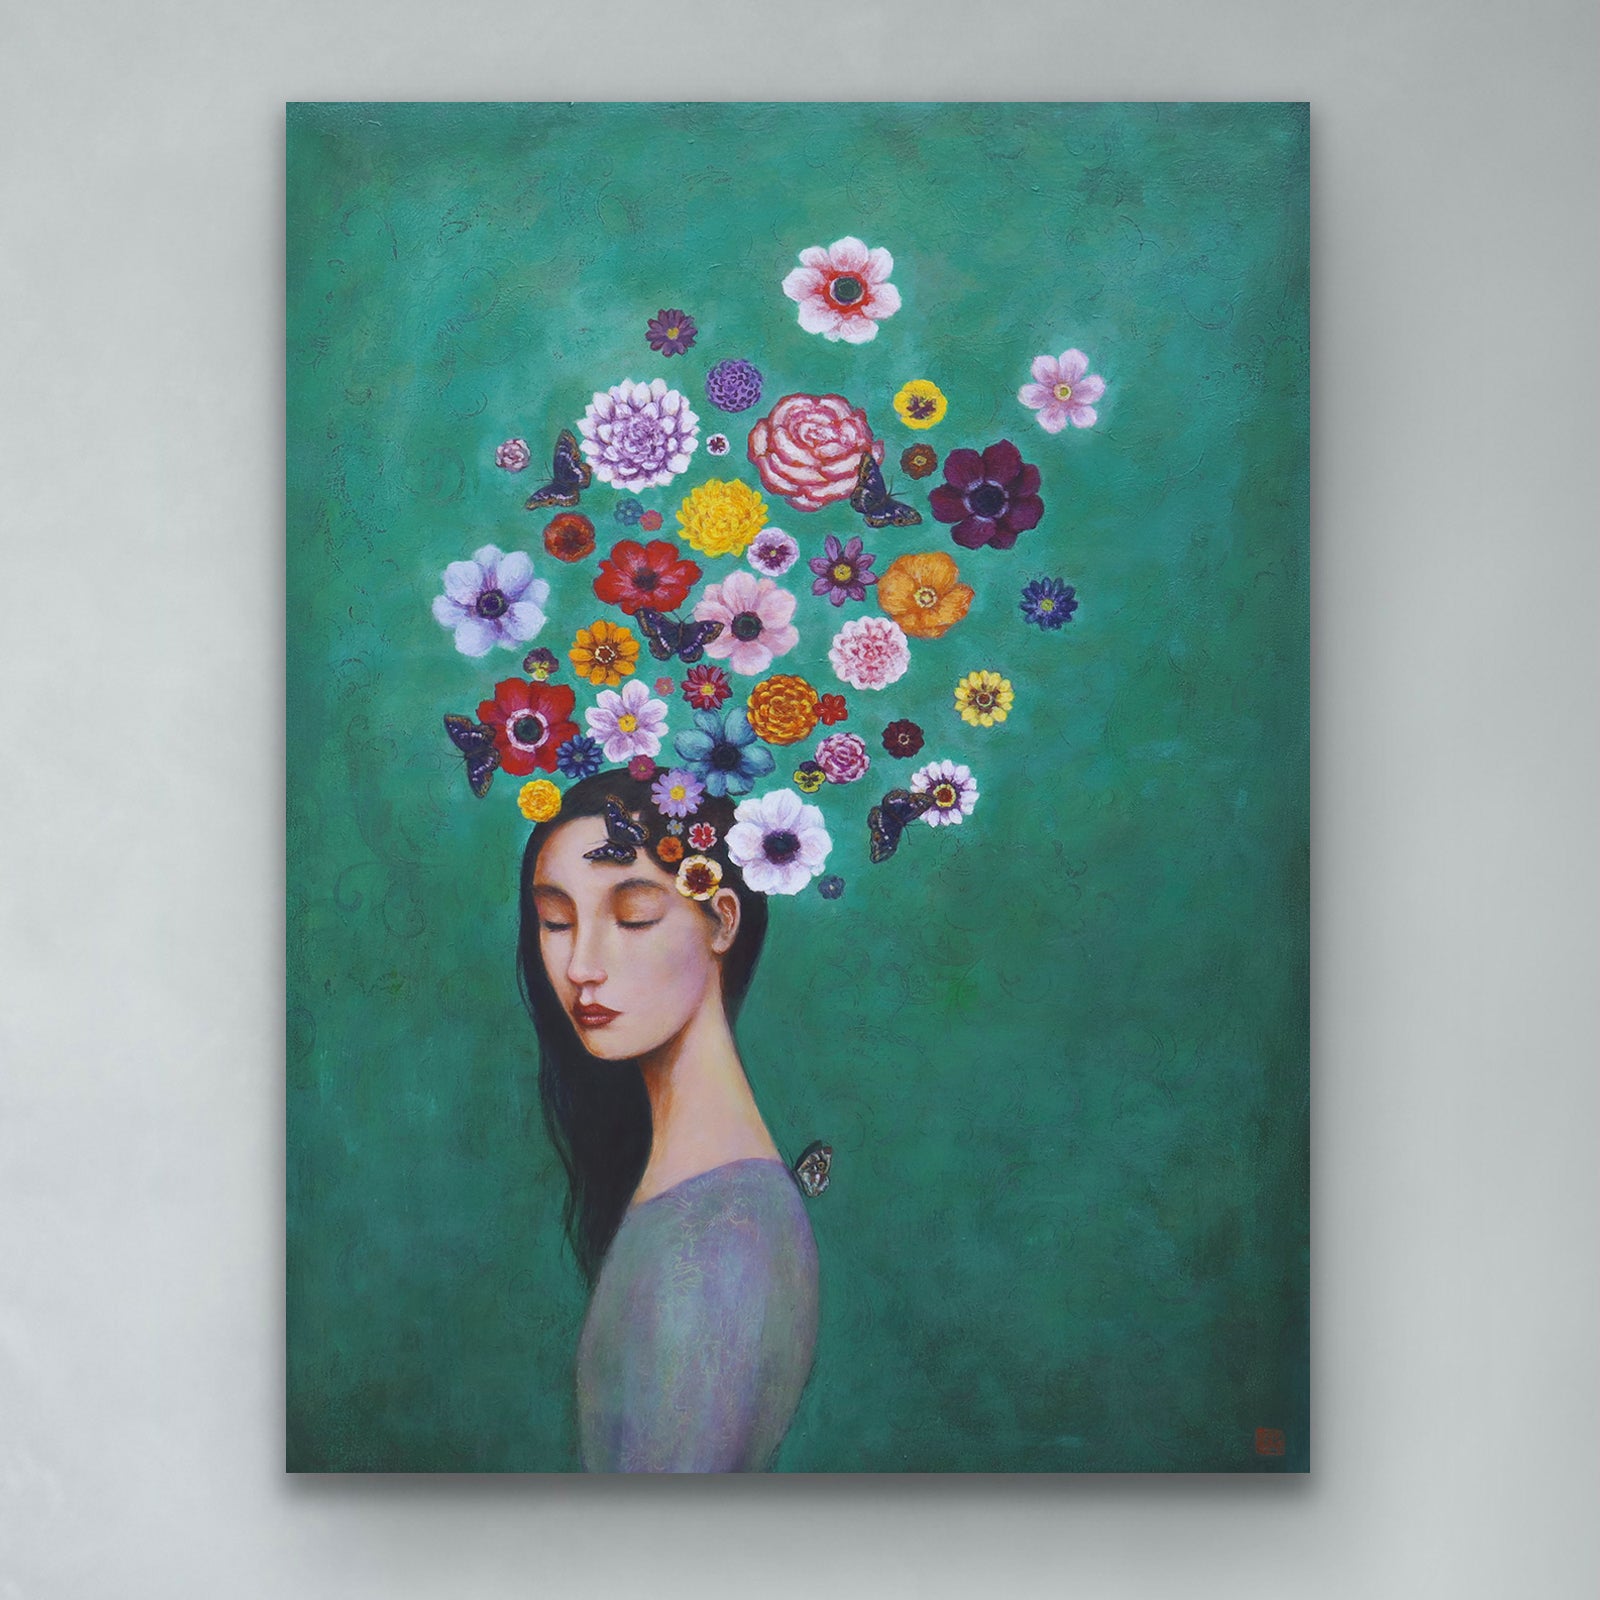 Artist Duy Huynh 's painting called "Windflower Reverie". A portrait of a woman with butterflies and flowers swirling around her head. Available at Lark & Key, Charlotte NC.